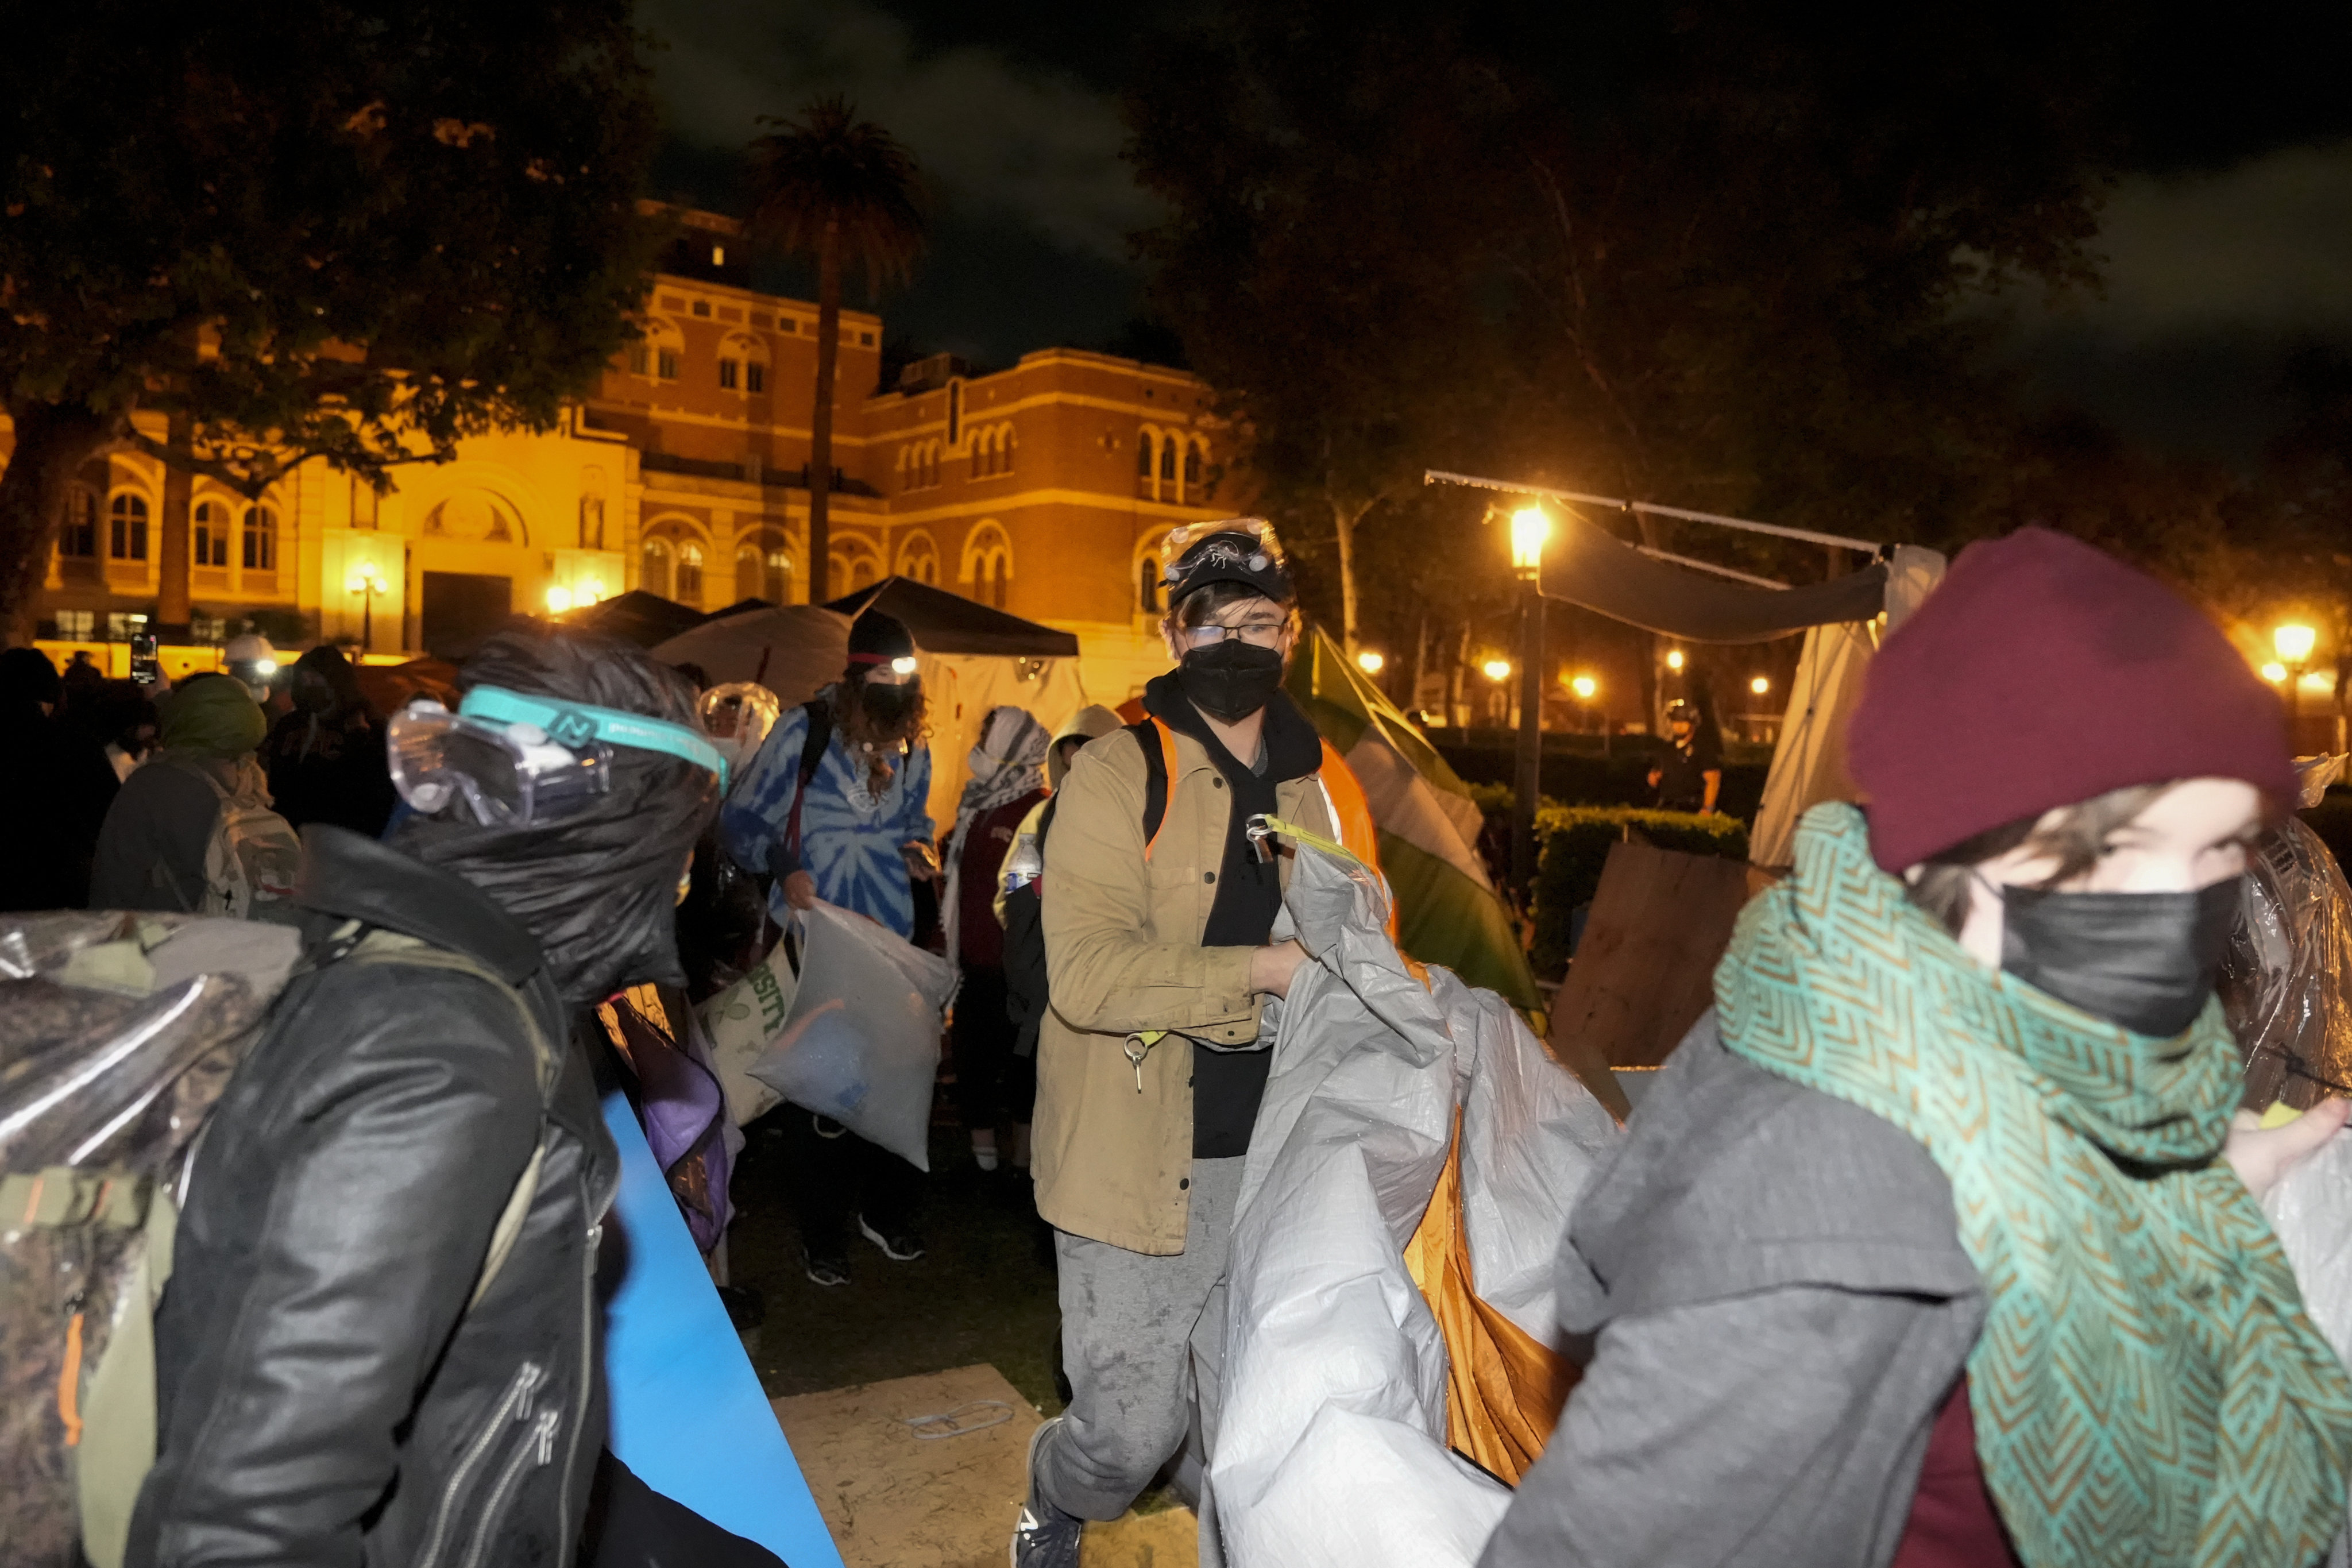 Pro-Palestinian demonstrators at the University of Southern California remove their belongings. Photo: AP